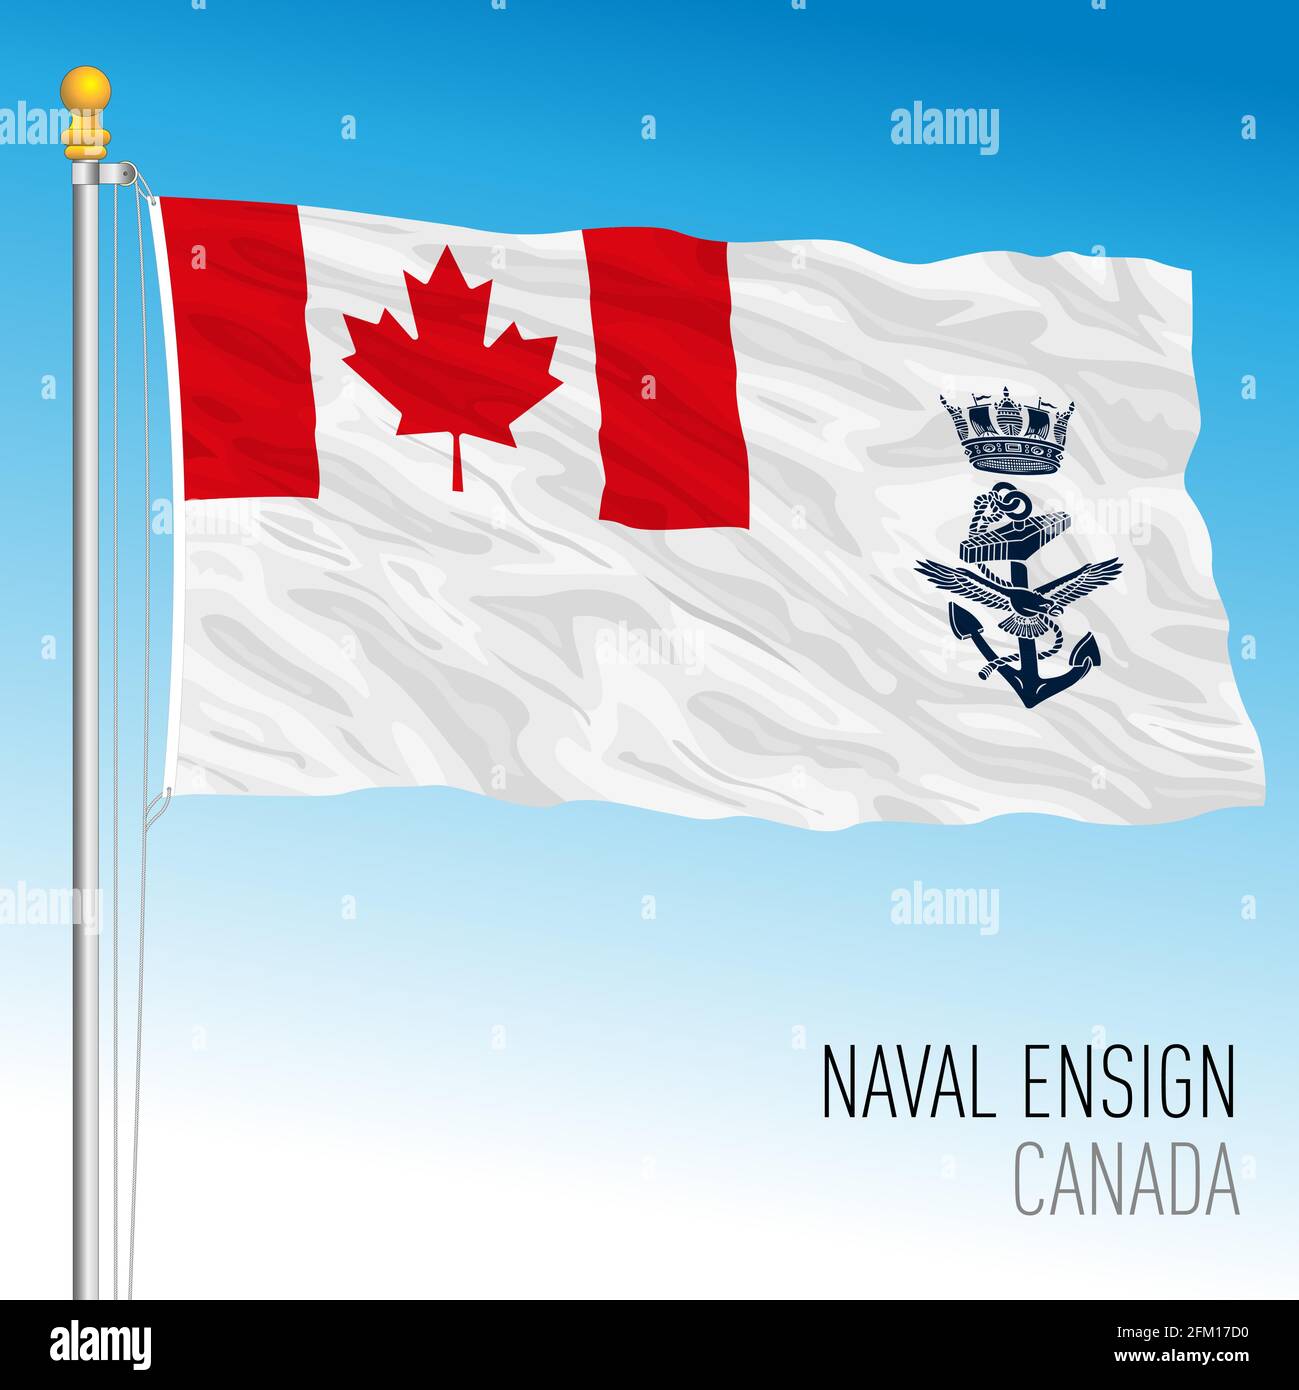 Canadian Navy flag, Canada, north american country, vector illustration Stock Vector